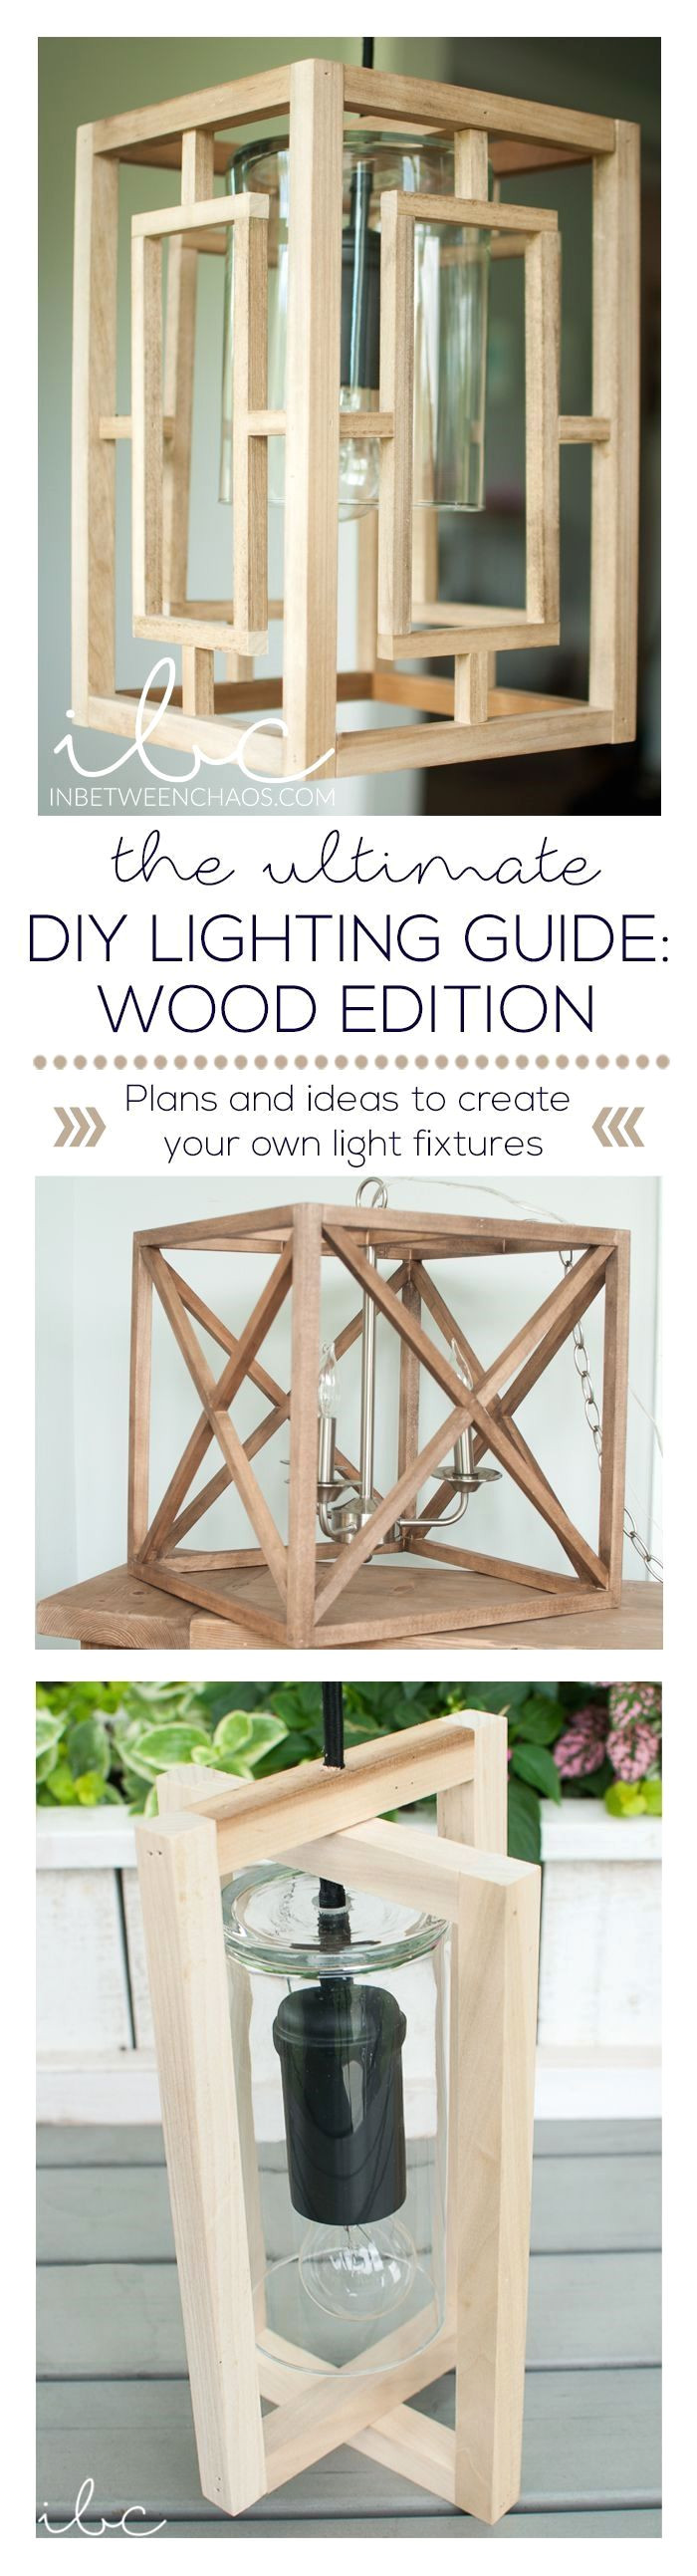 beginner woodworking projects click the picture for many diy wood projects plans 44285287